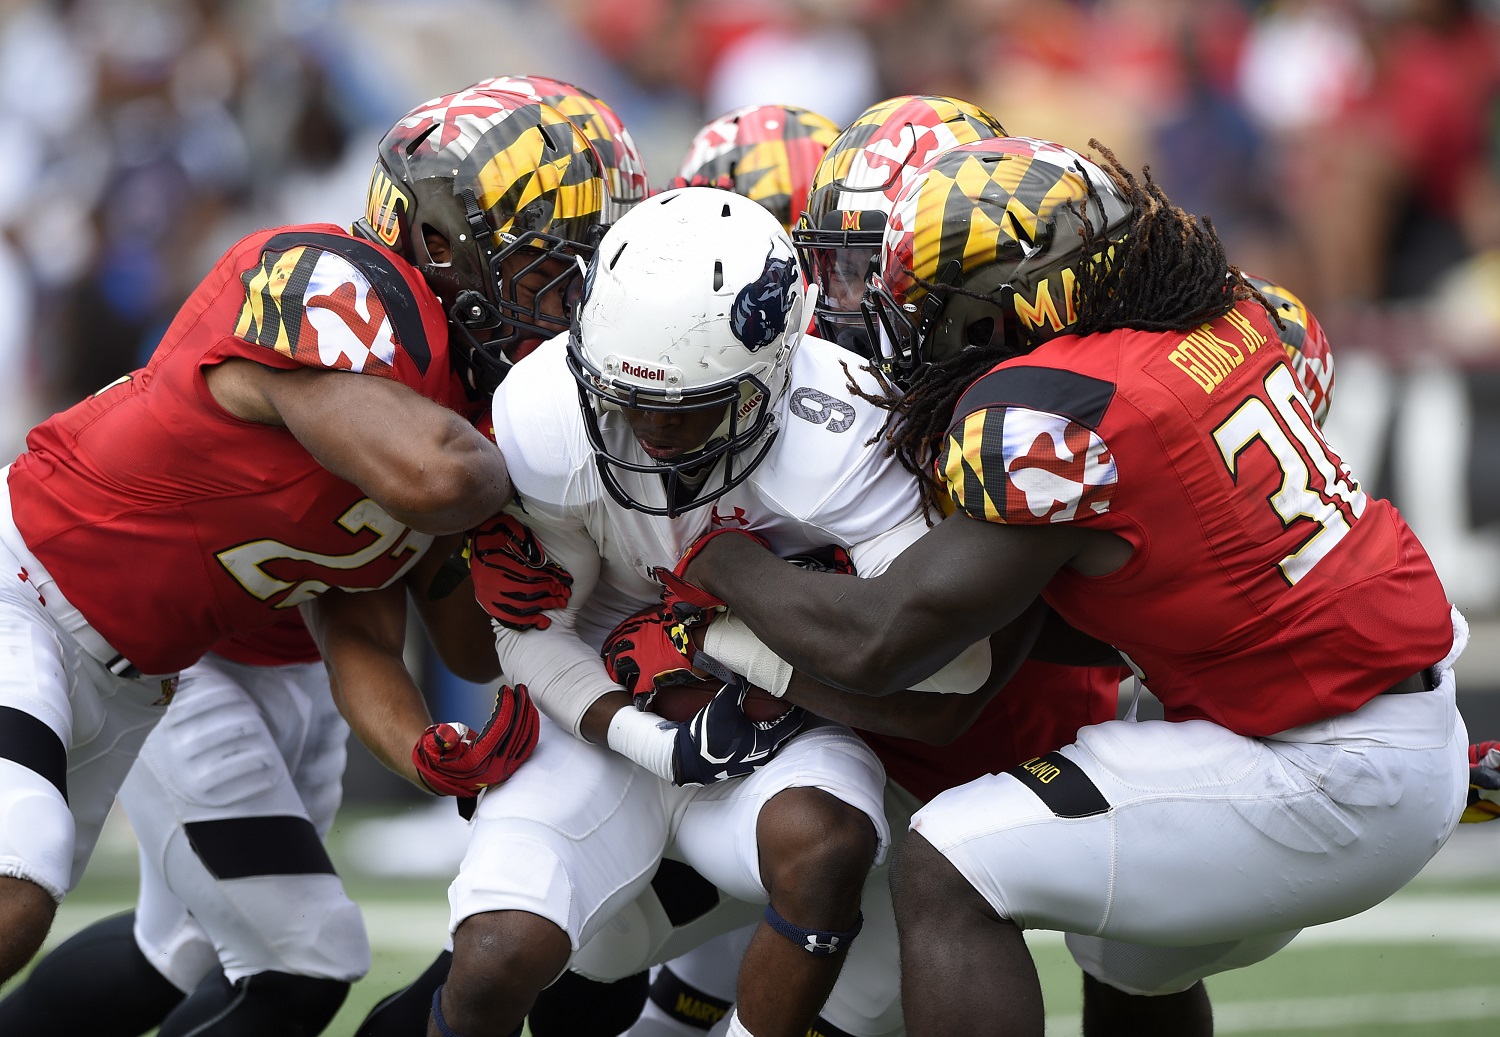 FILE - In this Sept. 3, 2016, file photo, Howard kick returner Jalen Avery (9) is tackled by Maryland's Kenneth Goins Jr. (30), Isaiah Davis, left, and others on a punt return in the second half of an NCAA football game in College Park, Md. After spending last season as Michigan's defense coordinator, Maryland first-year coach DJ Durkin must improve his own defense if the Terrapins are to have a chance to upset the second-ranked Wolverines on Saturday. (AP Photo/Nick Wass, File)